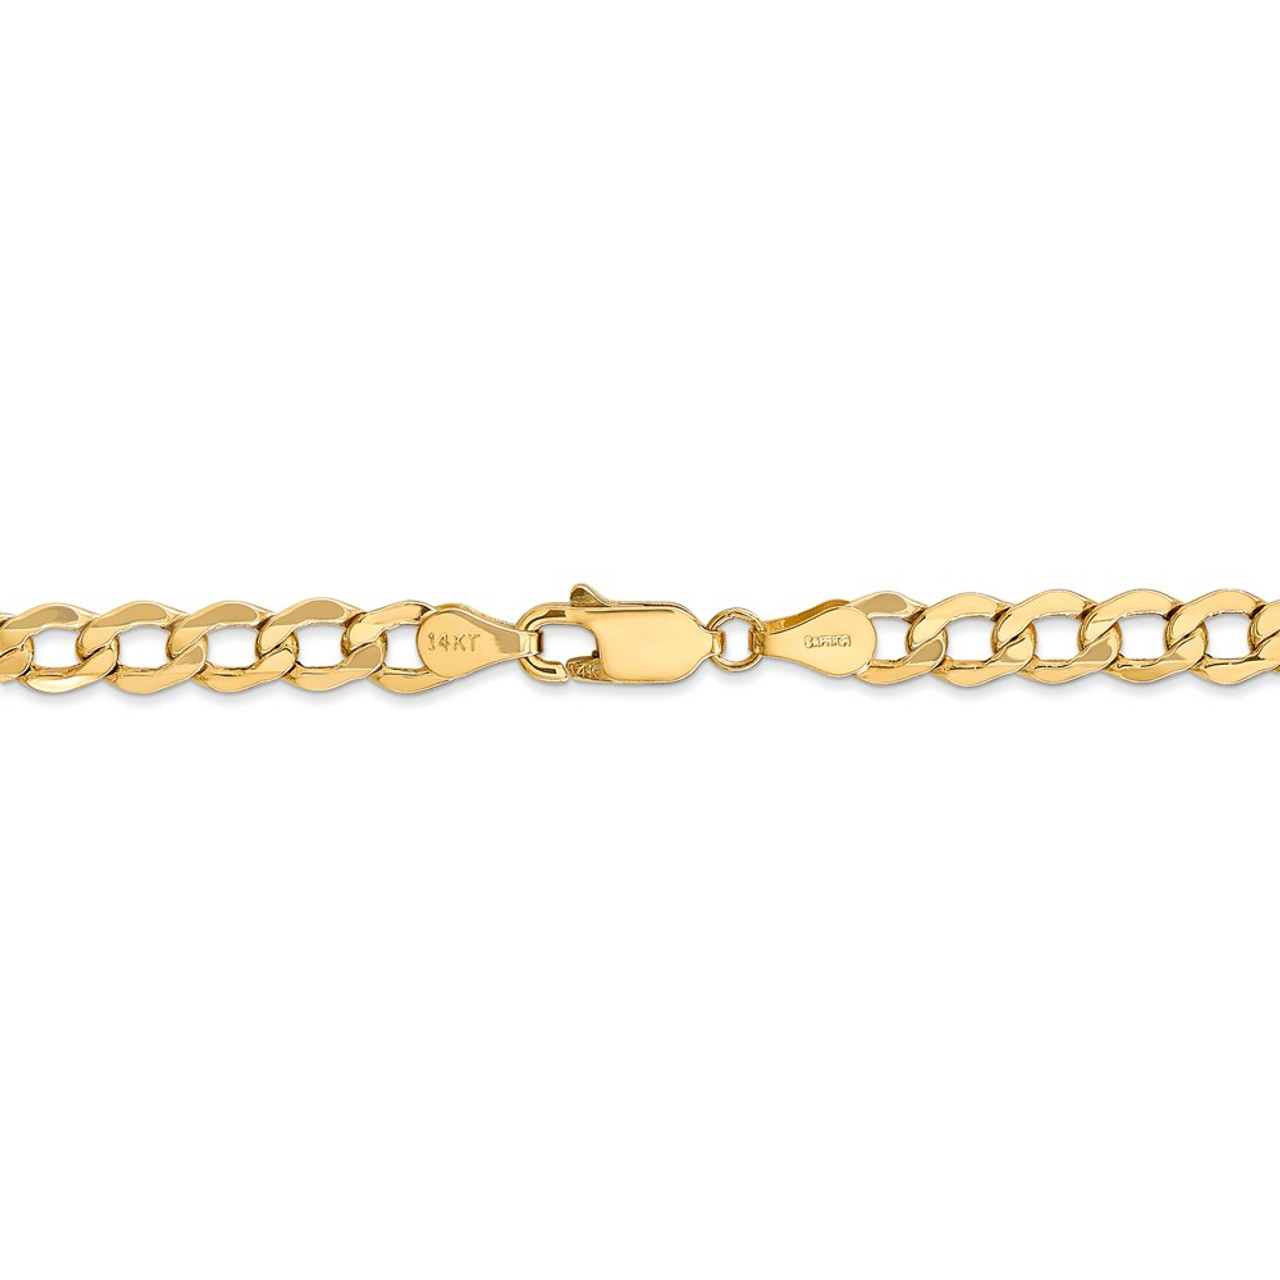 Solid Curb Chain Necklace 14K Yellow Gold 18